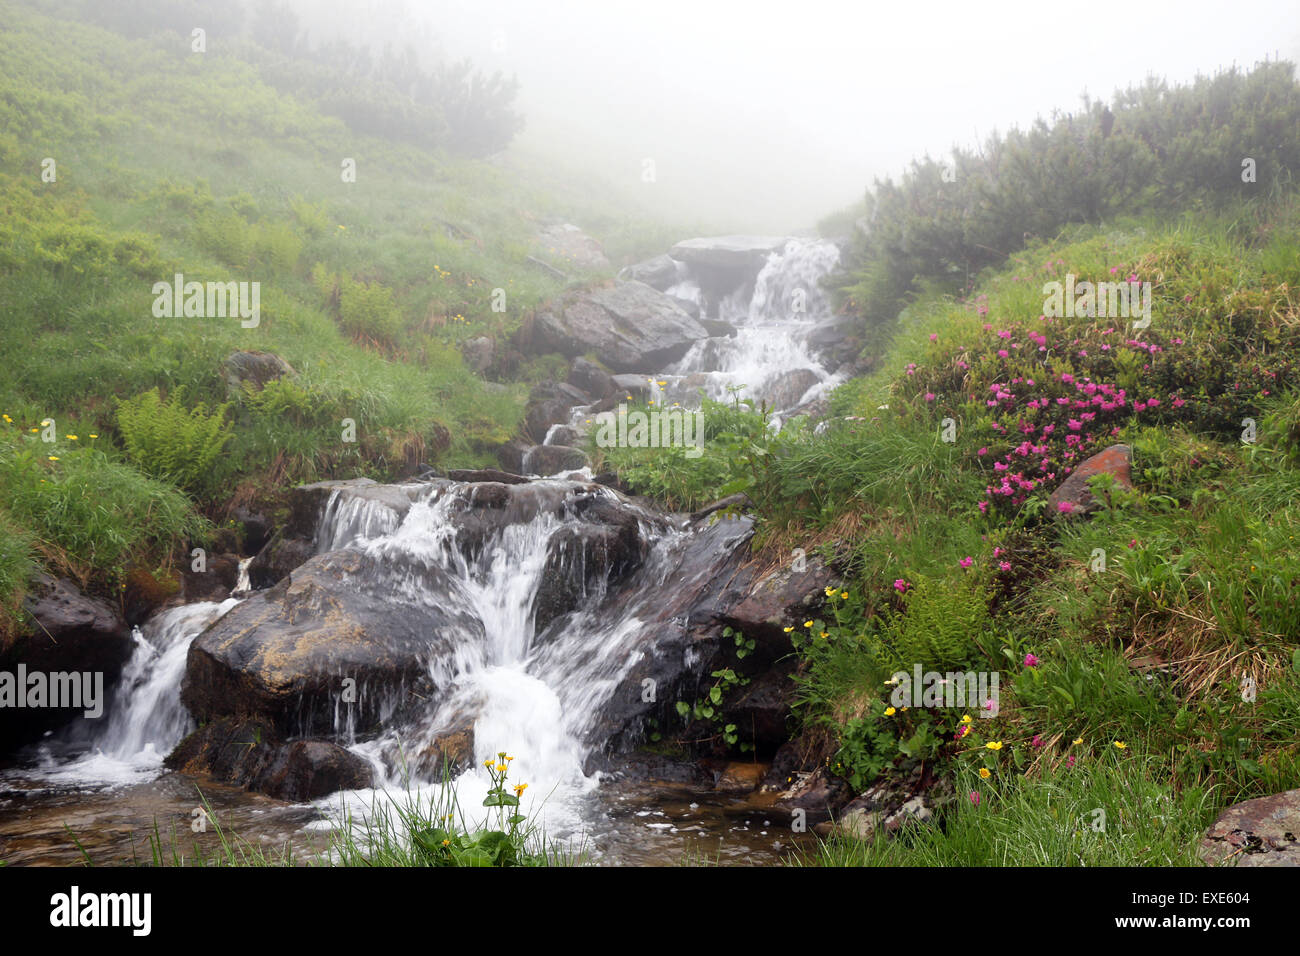 The Carpathian Mountain river Prut, which beginning run on Mount Hoverla Stock Photo